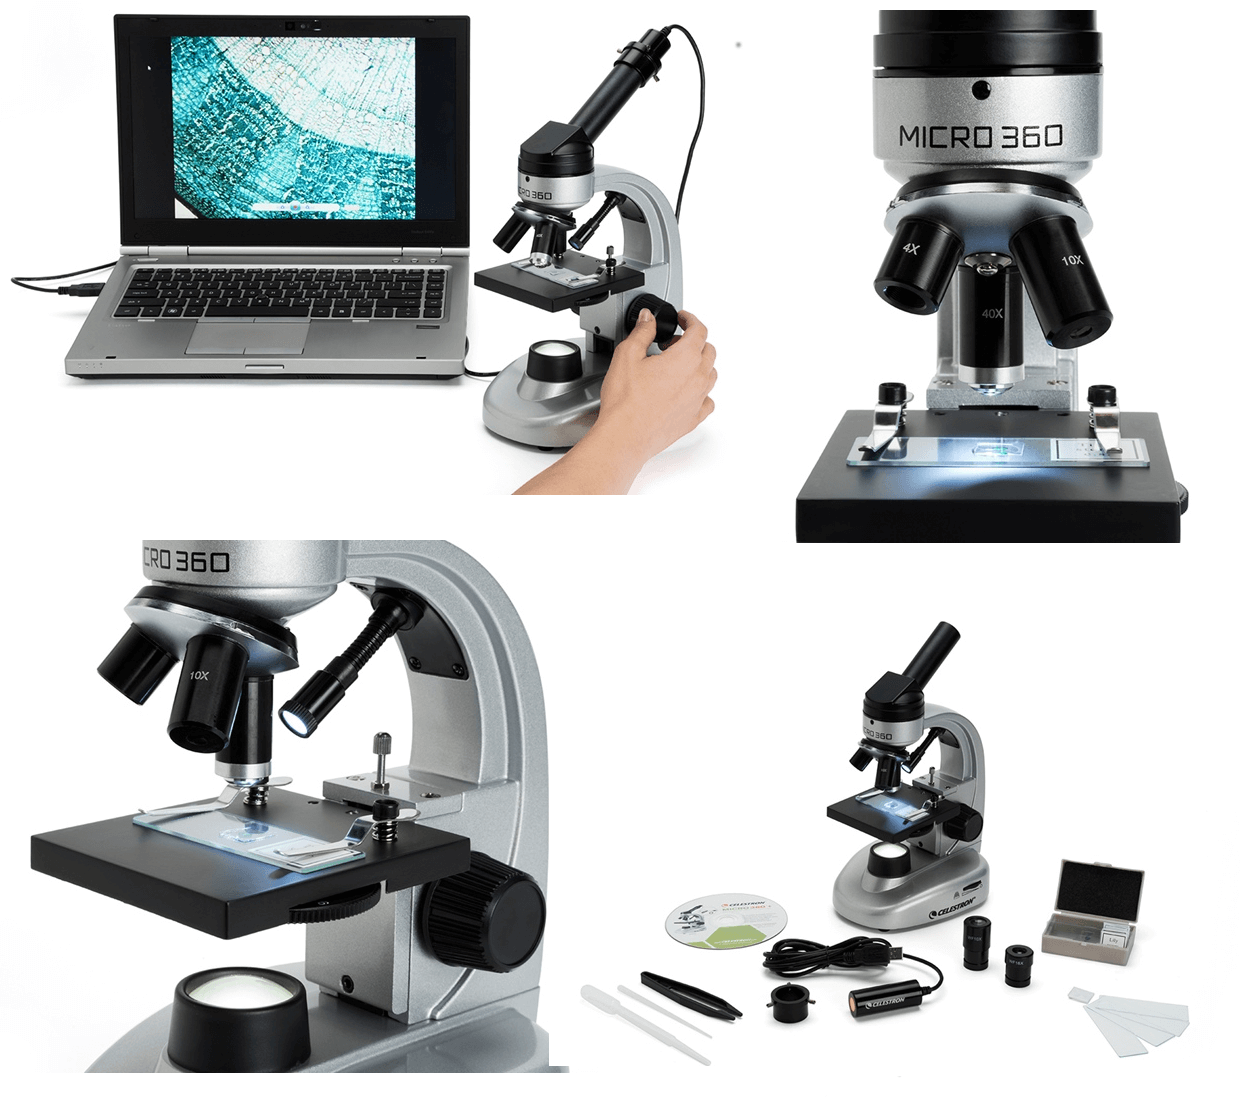 Basic Microscope for Home -Amateur Mineralogy